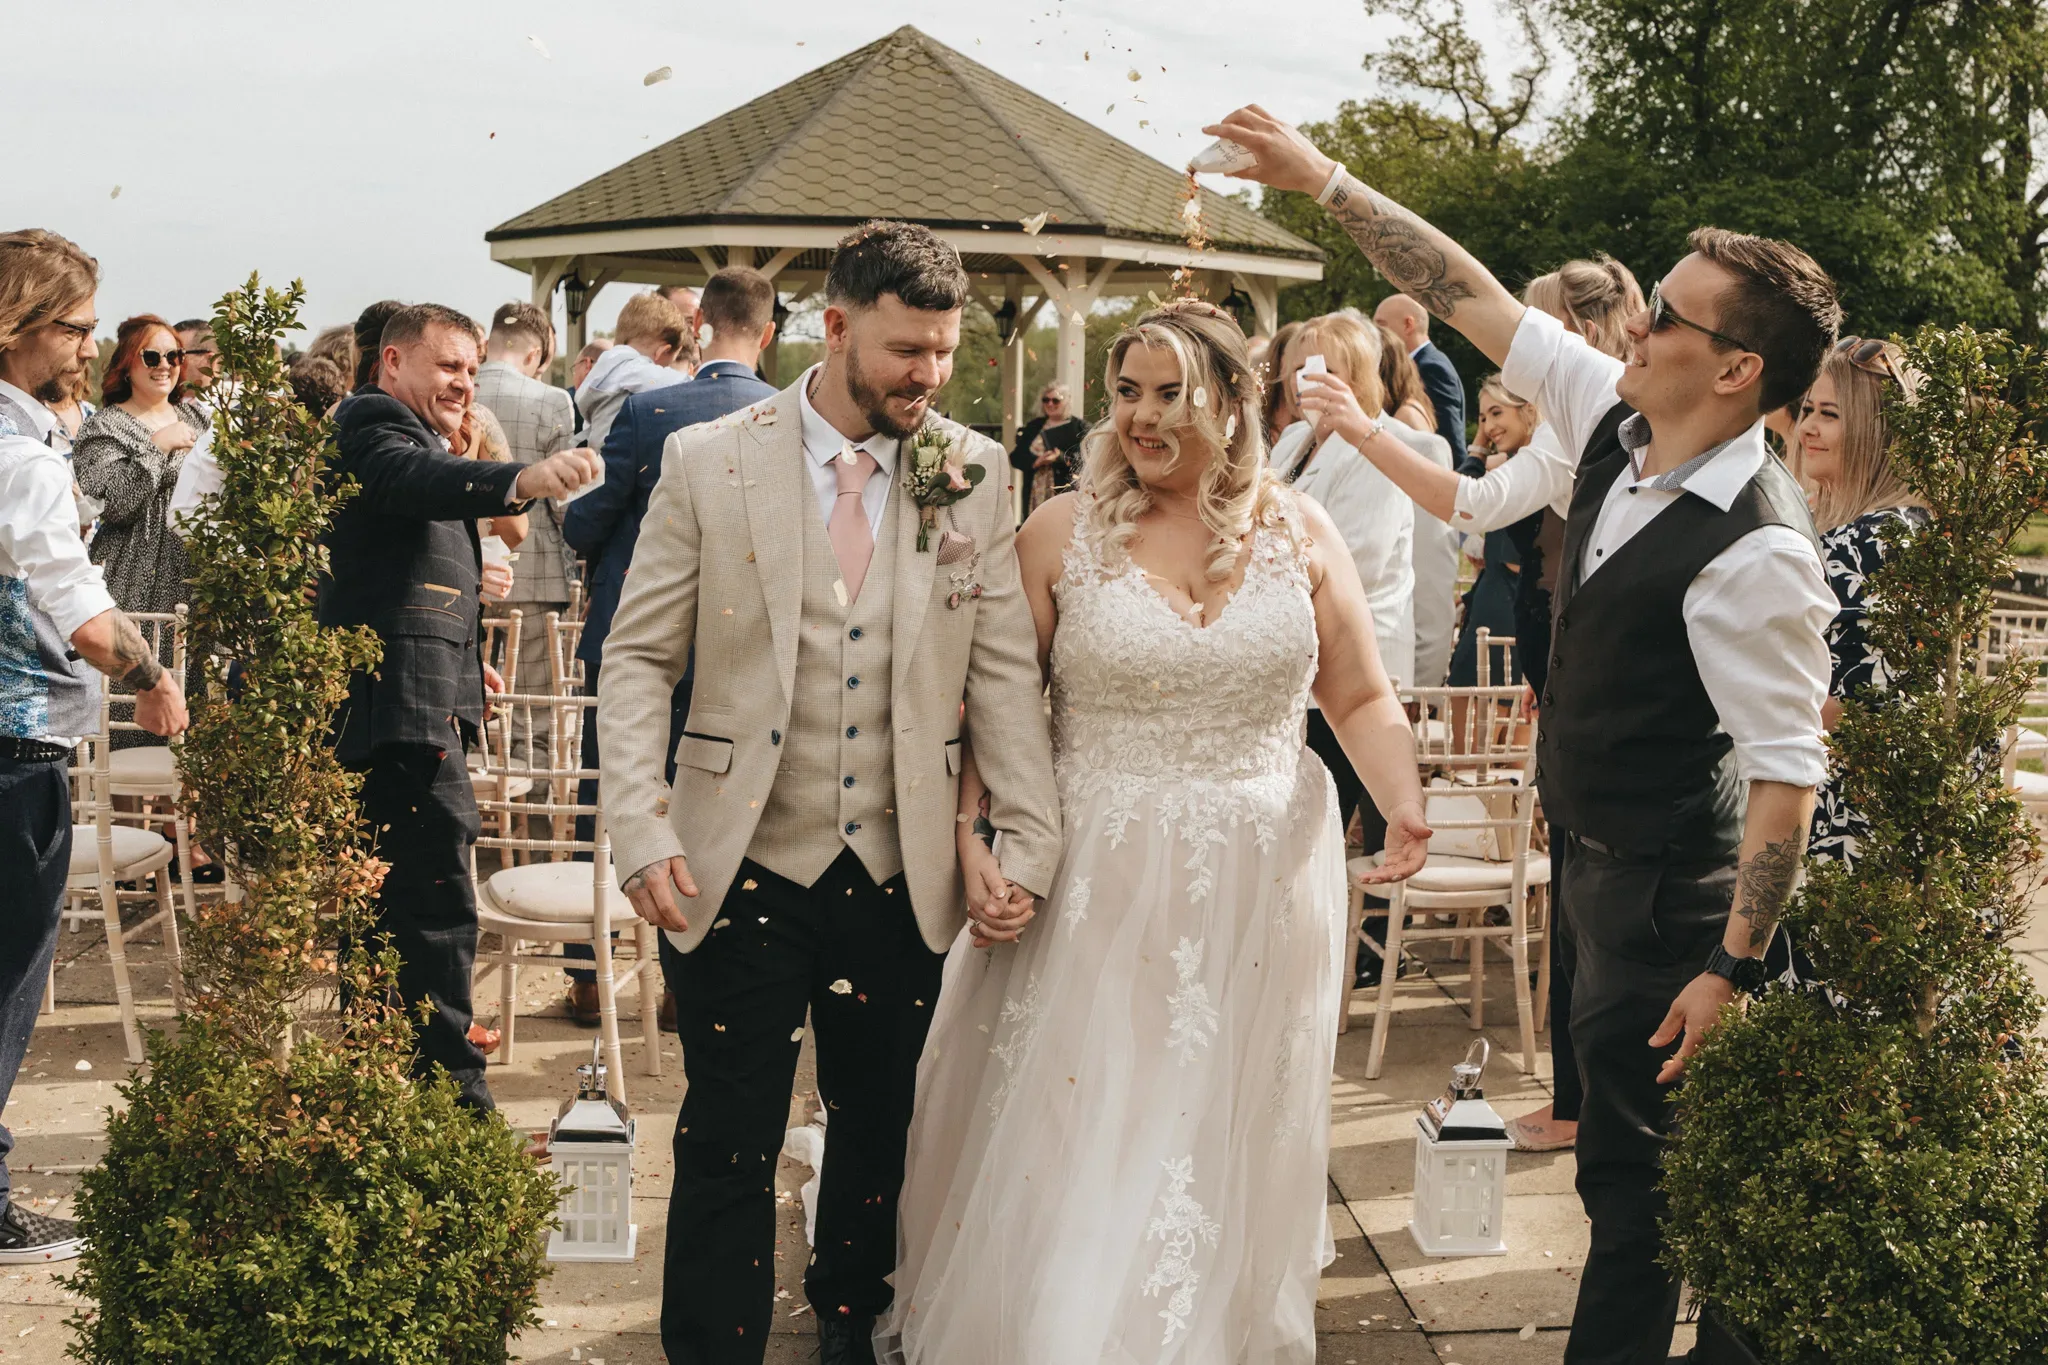 A newlywed couple walks down the aisle outdoors, smiling as guests throw flower petals at them. the bride wears a white lace gown and the groom, a beige suit. a gazebo and greenery are in the background.